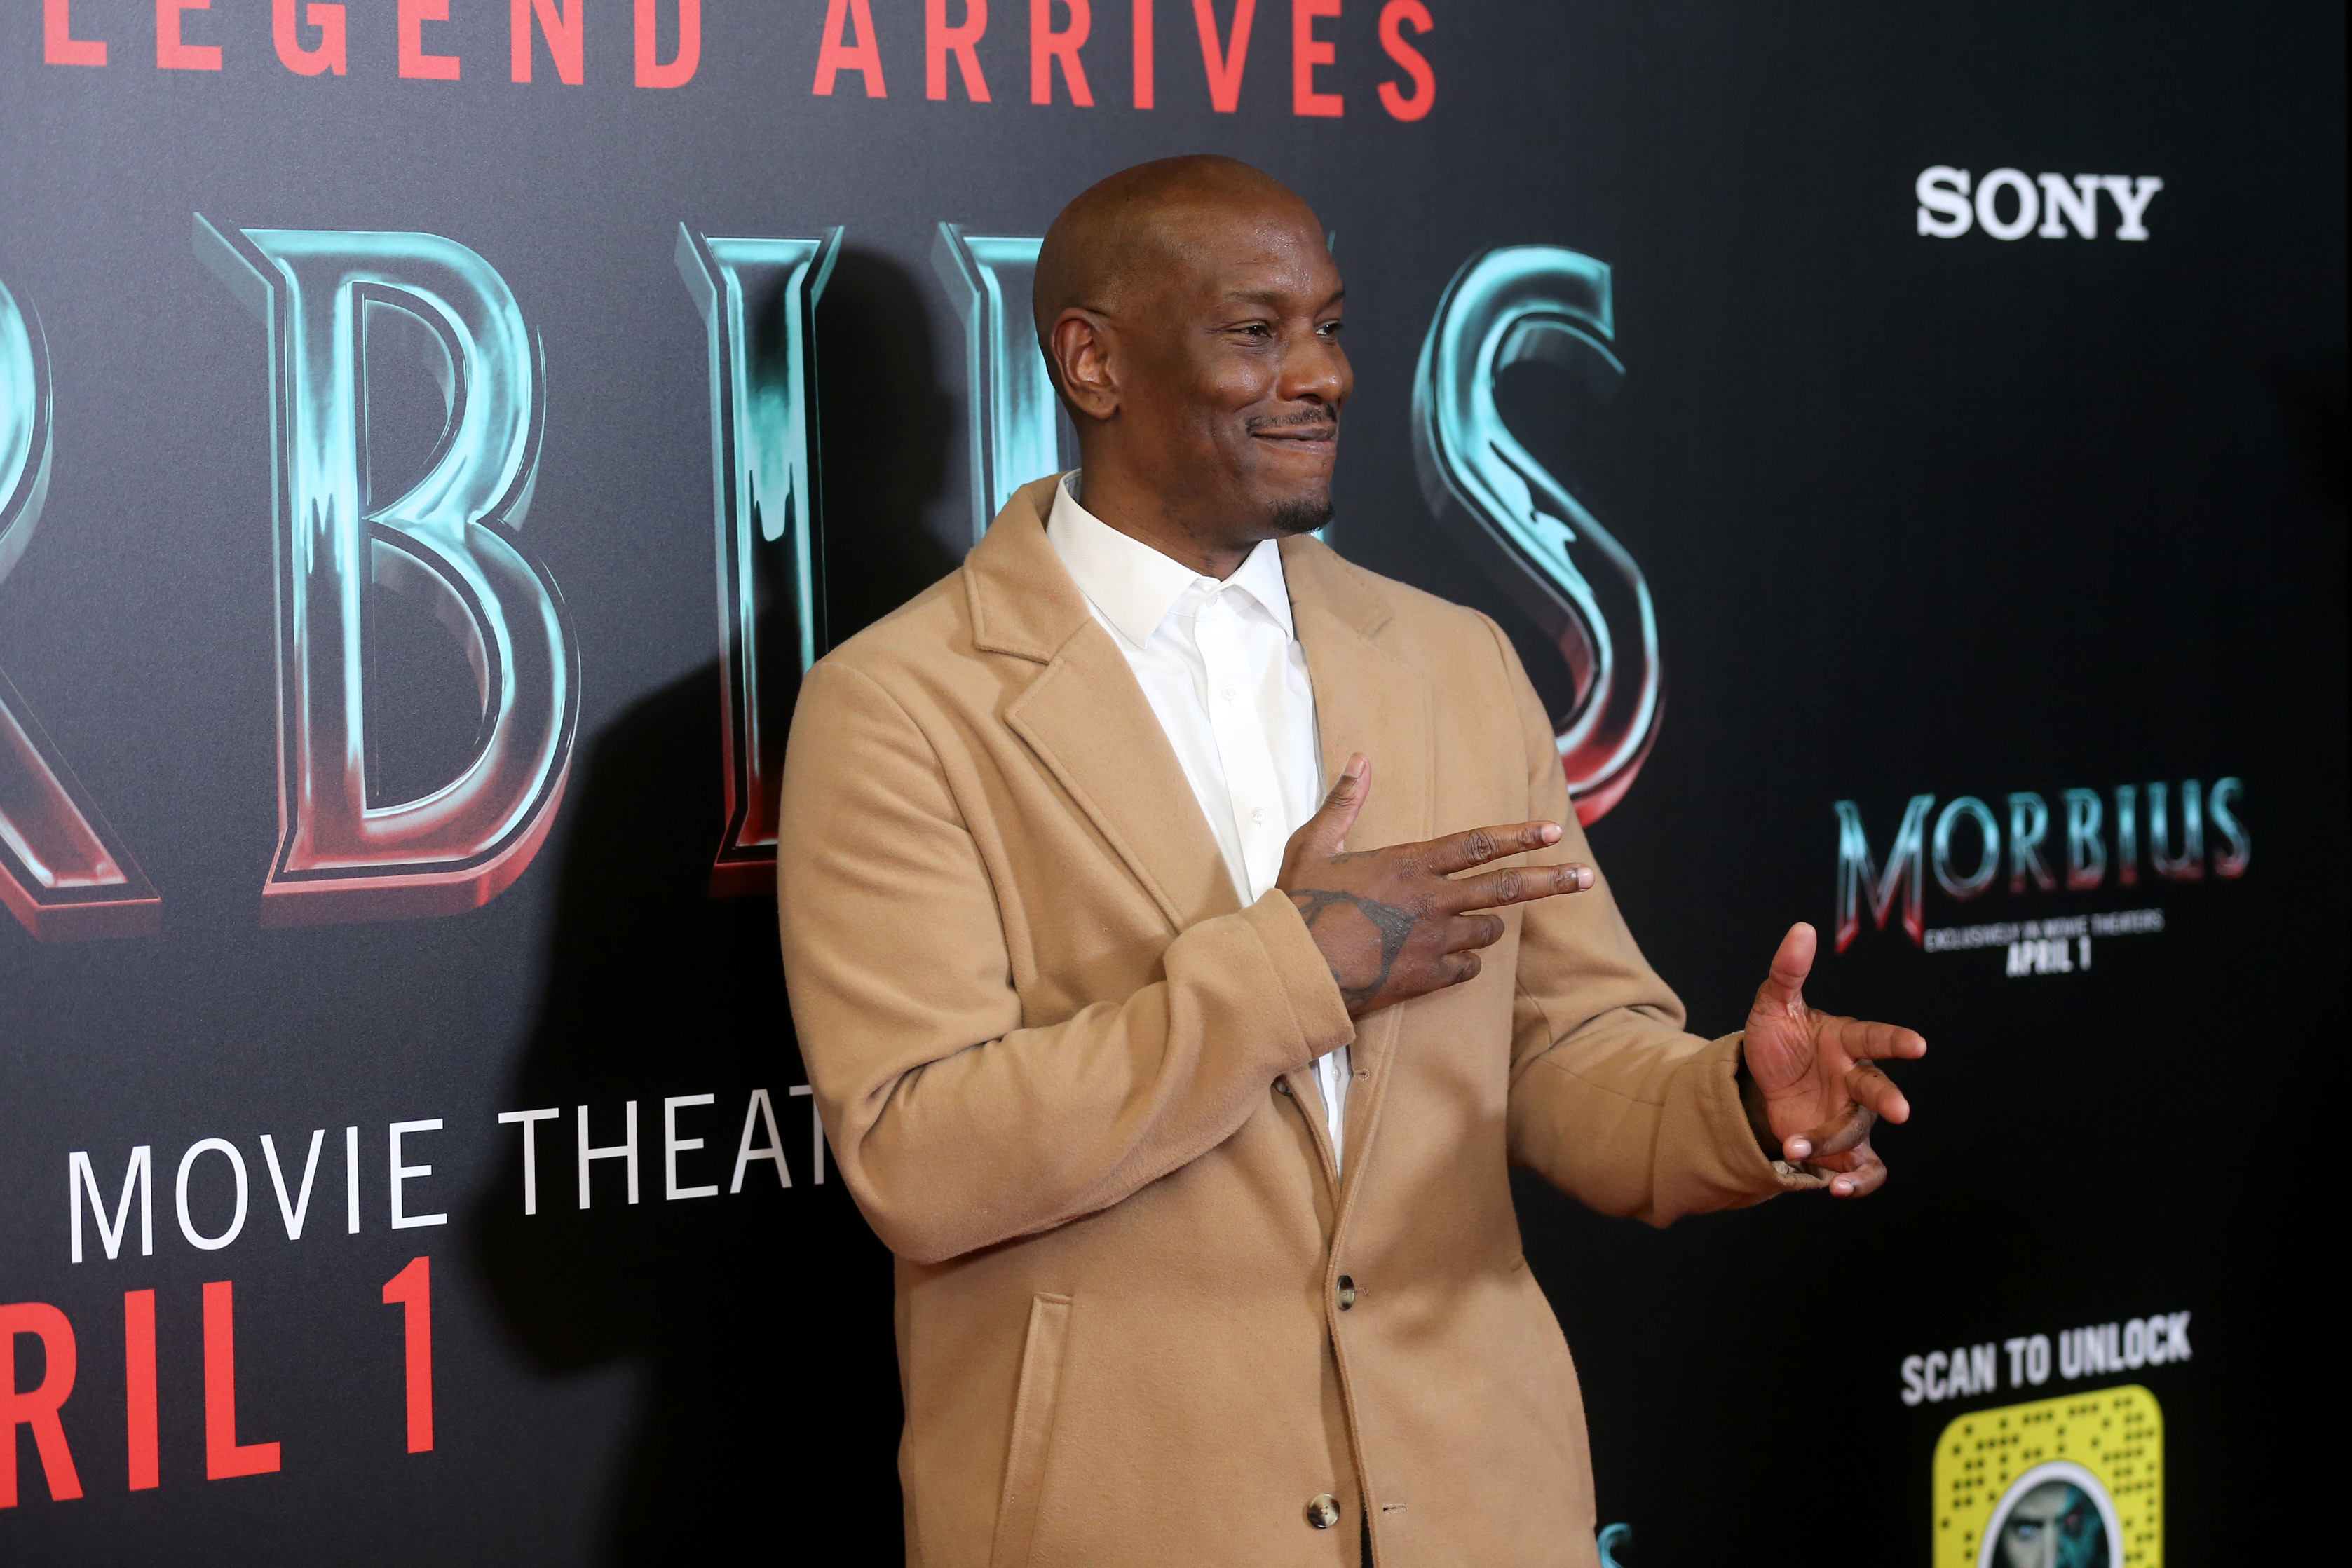 Tyrese Gibson, who was fooled by a fake Martin Scorsese quote, attends a fan screening of Morbius